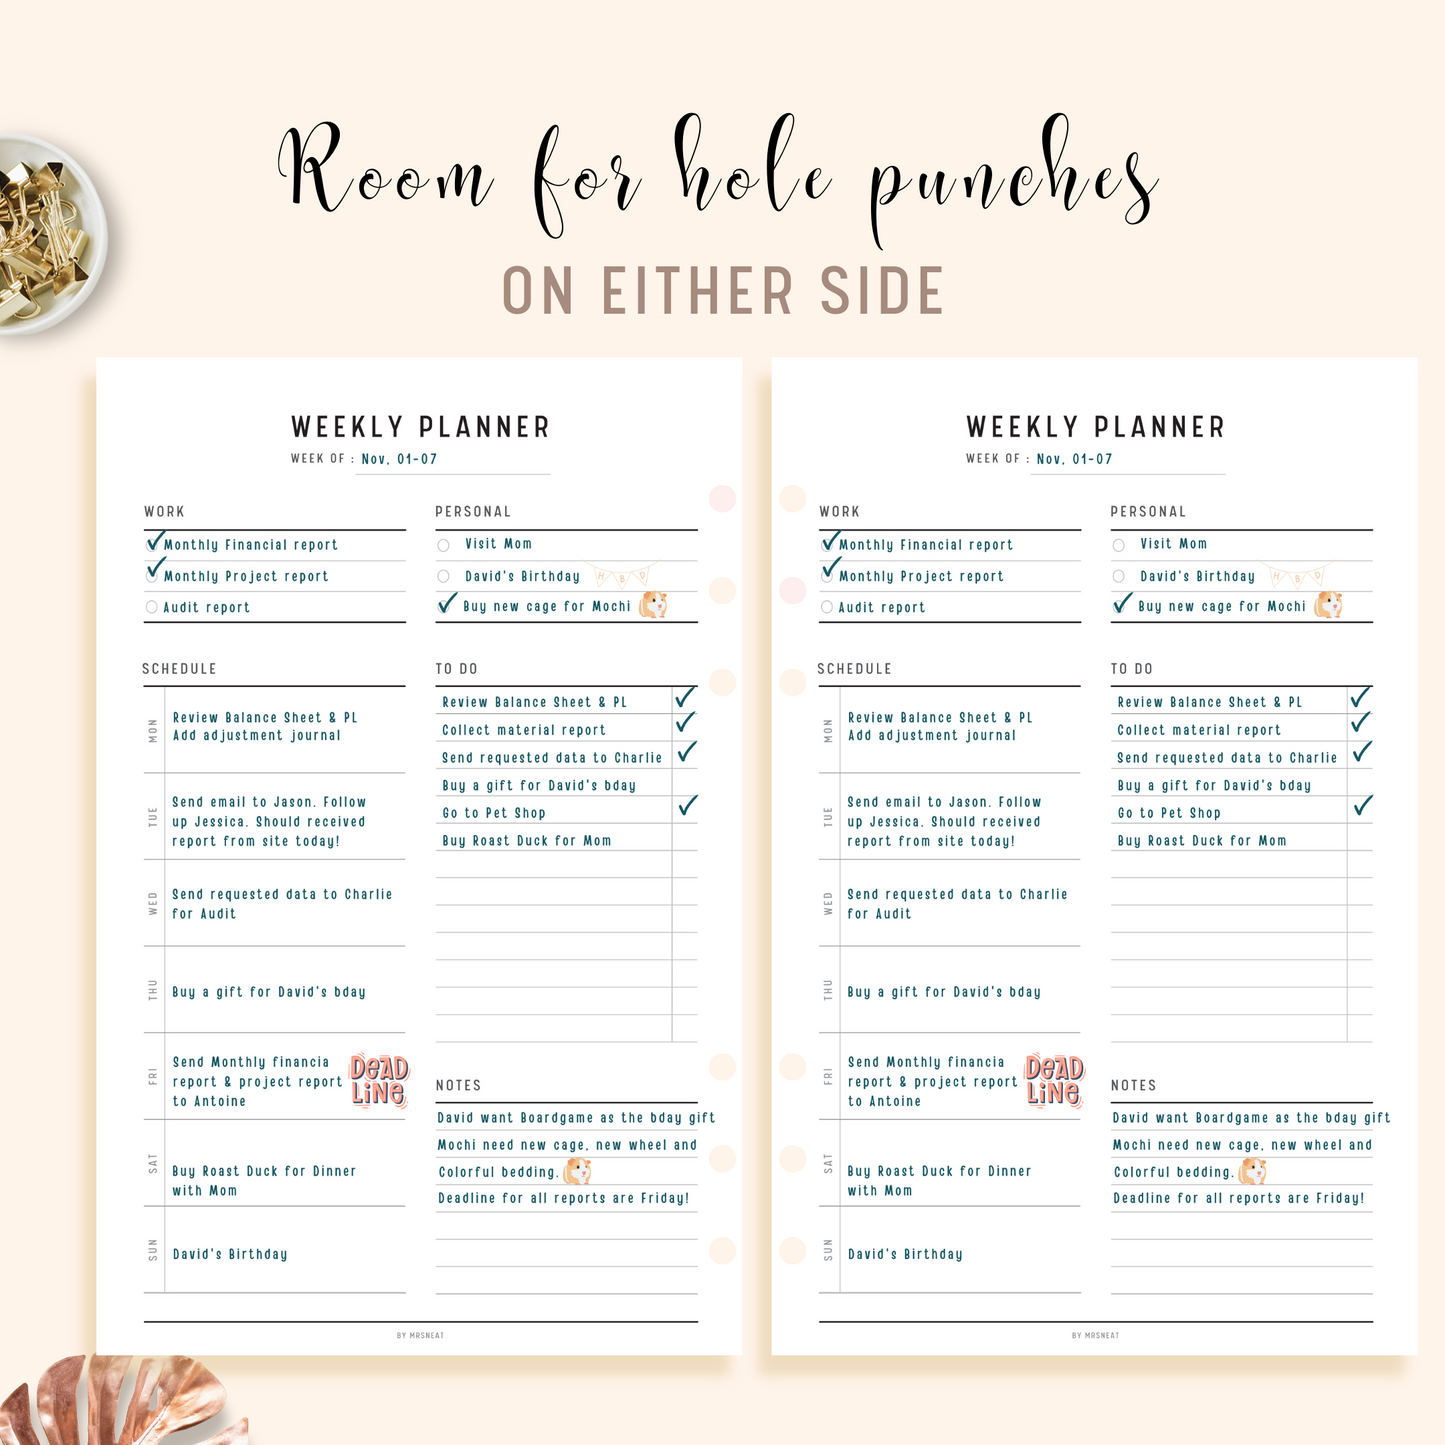 Minimalist Weekly Planner Printable with room for hole punches on either side